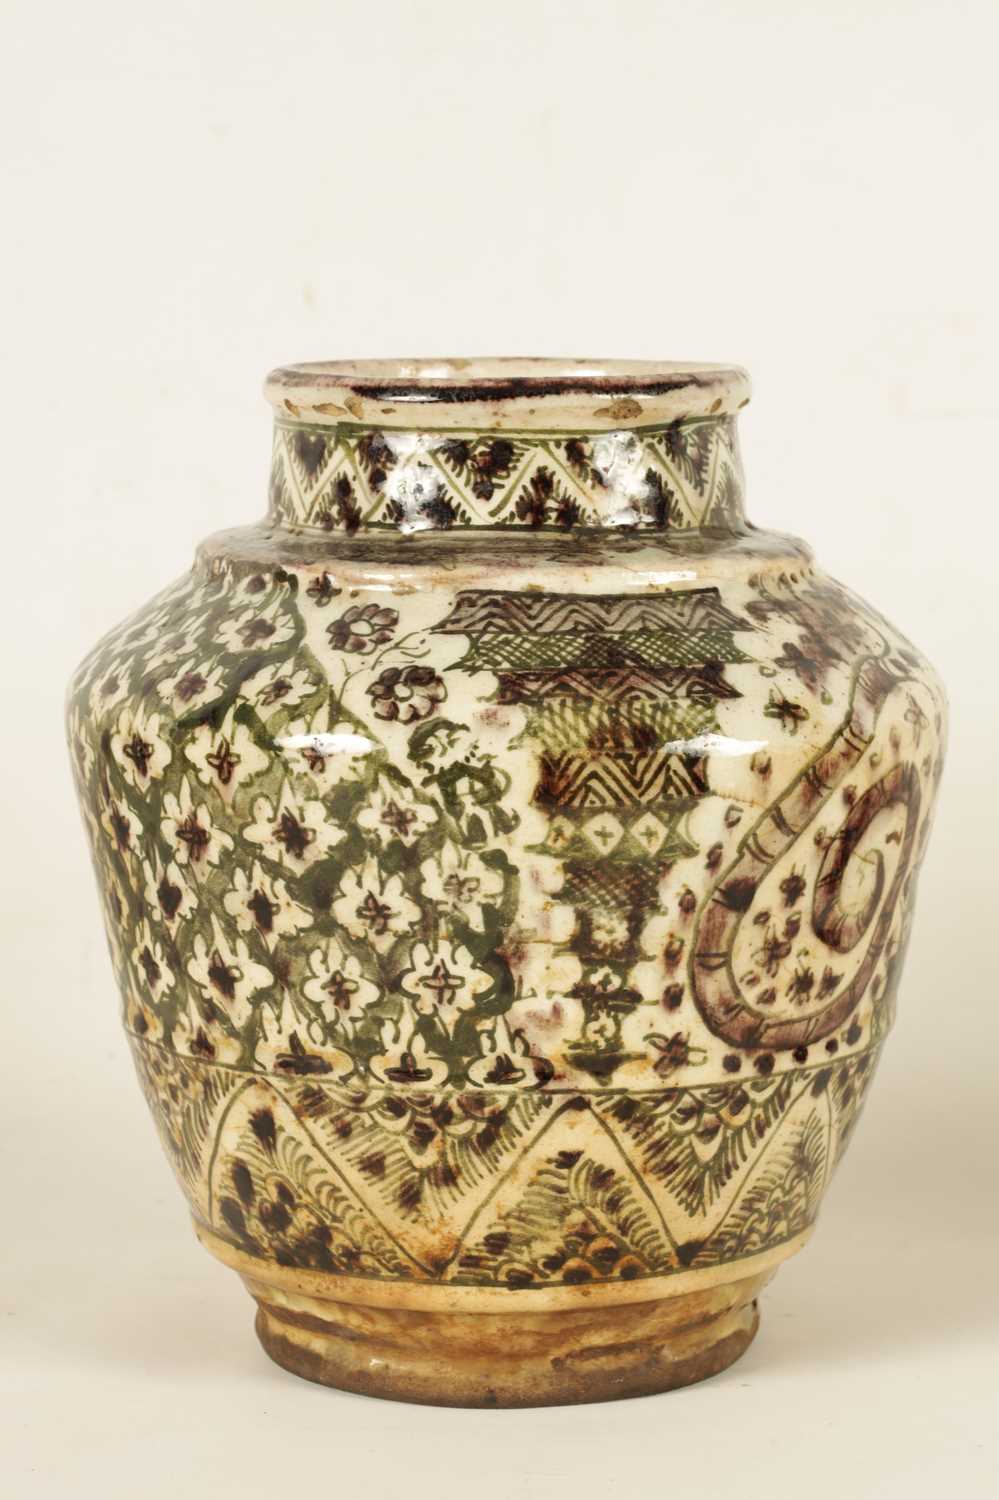 AN EARLY PERSIAN GLAZED EARTHENWARE SHOULDERED VASE - Image 5 of 10